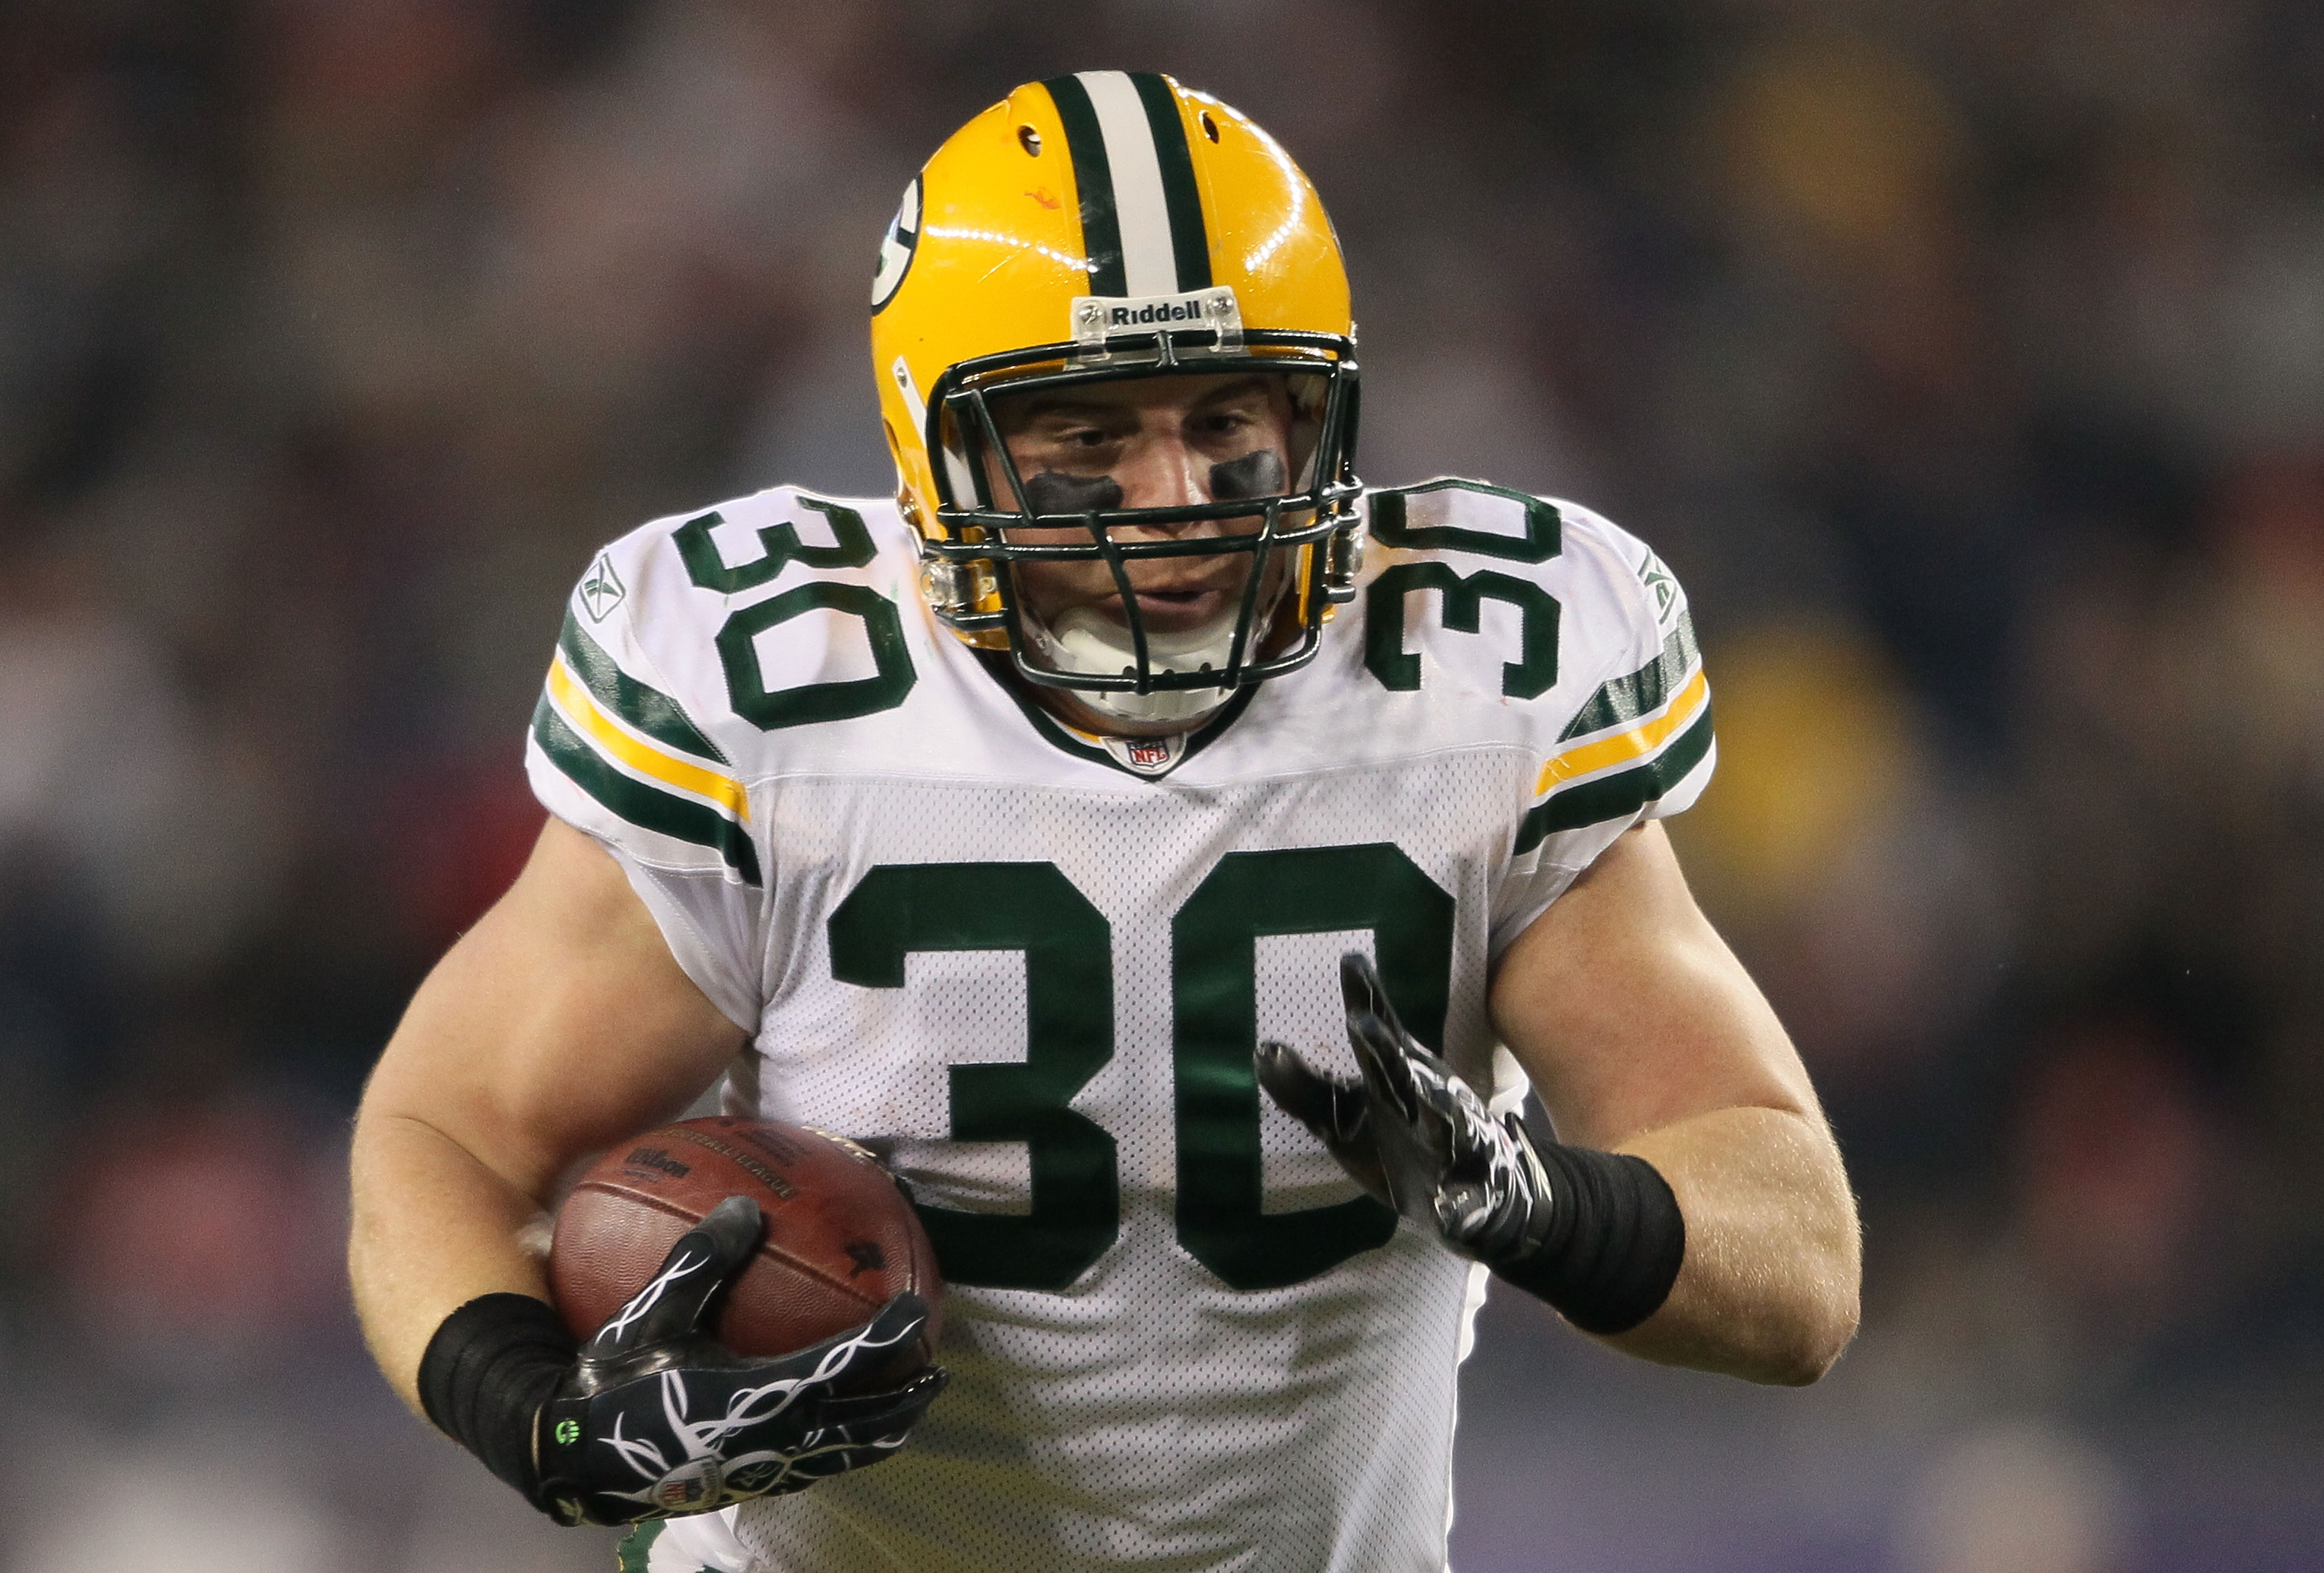 FOXBORO, MA - DECEMBER 19:  Running back John Kuhn #30 of the Green Bay Packers runs the ball during the game against the New England Patriots at Gillette Stadium on December 19, 2010 in Foxboro, Massachusetts.  The Patriots won the game 31-27. (Photo by